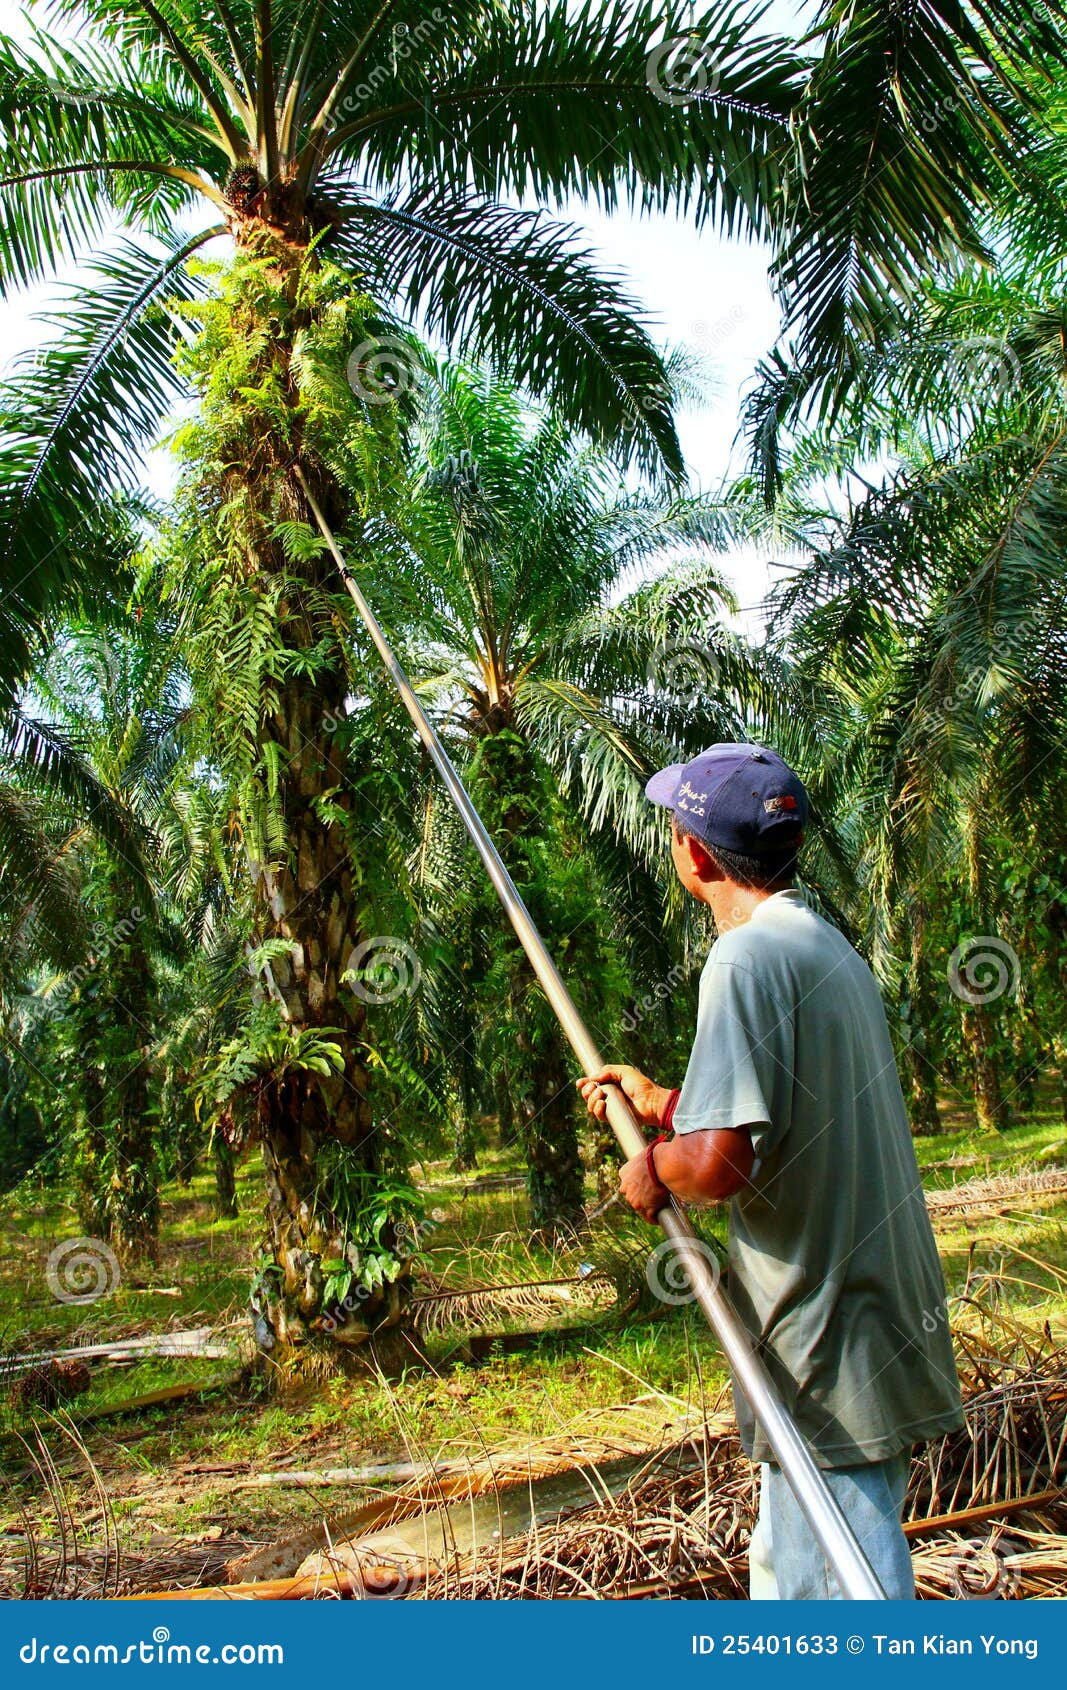  Oil  Palm  Harvesting editorial stock photo Image of asia 